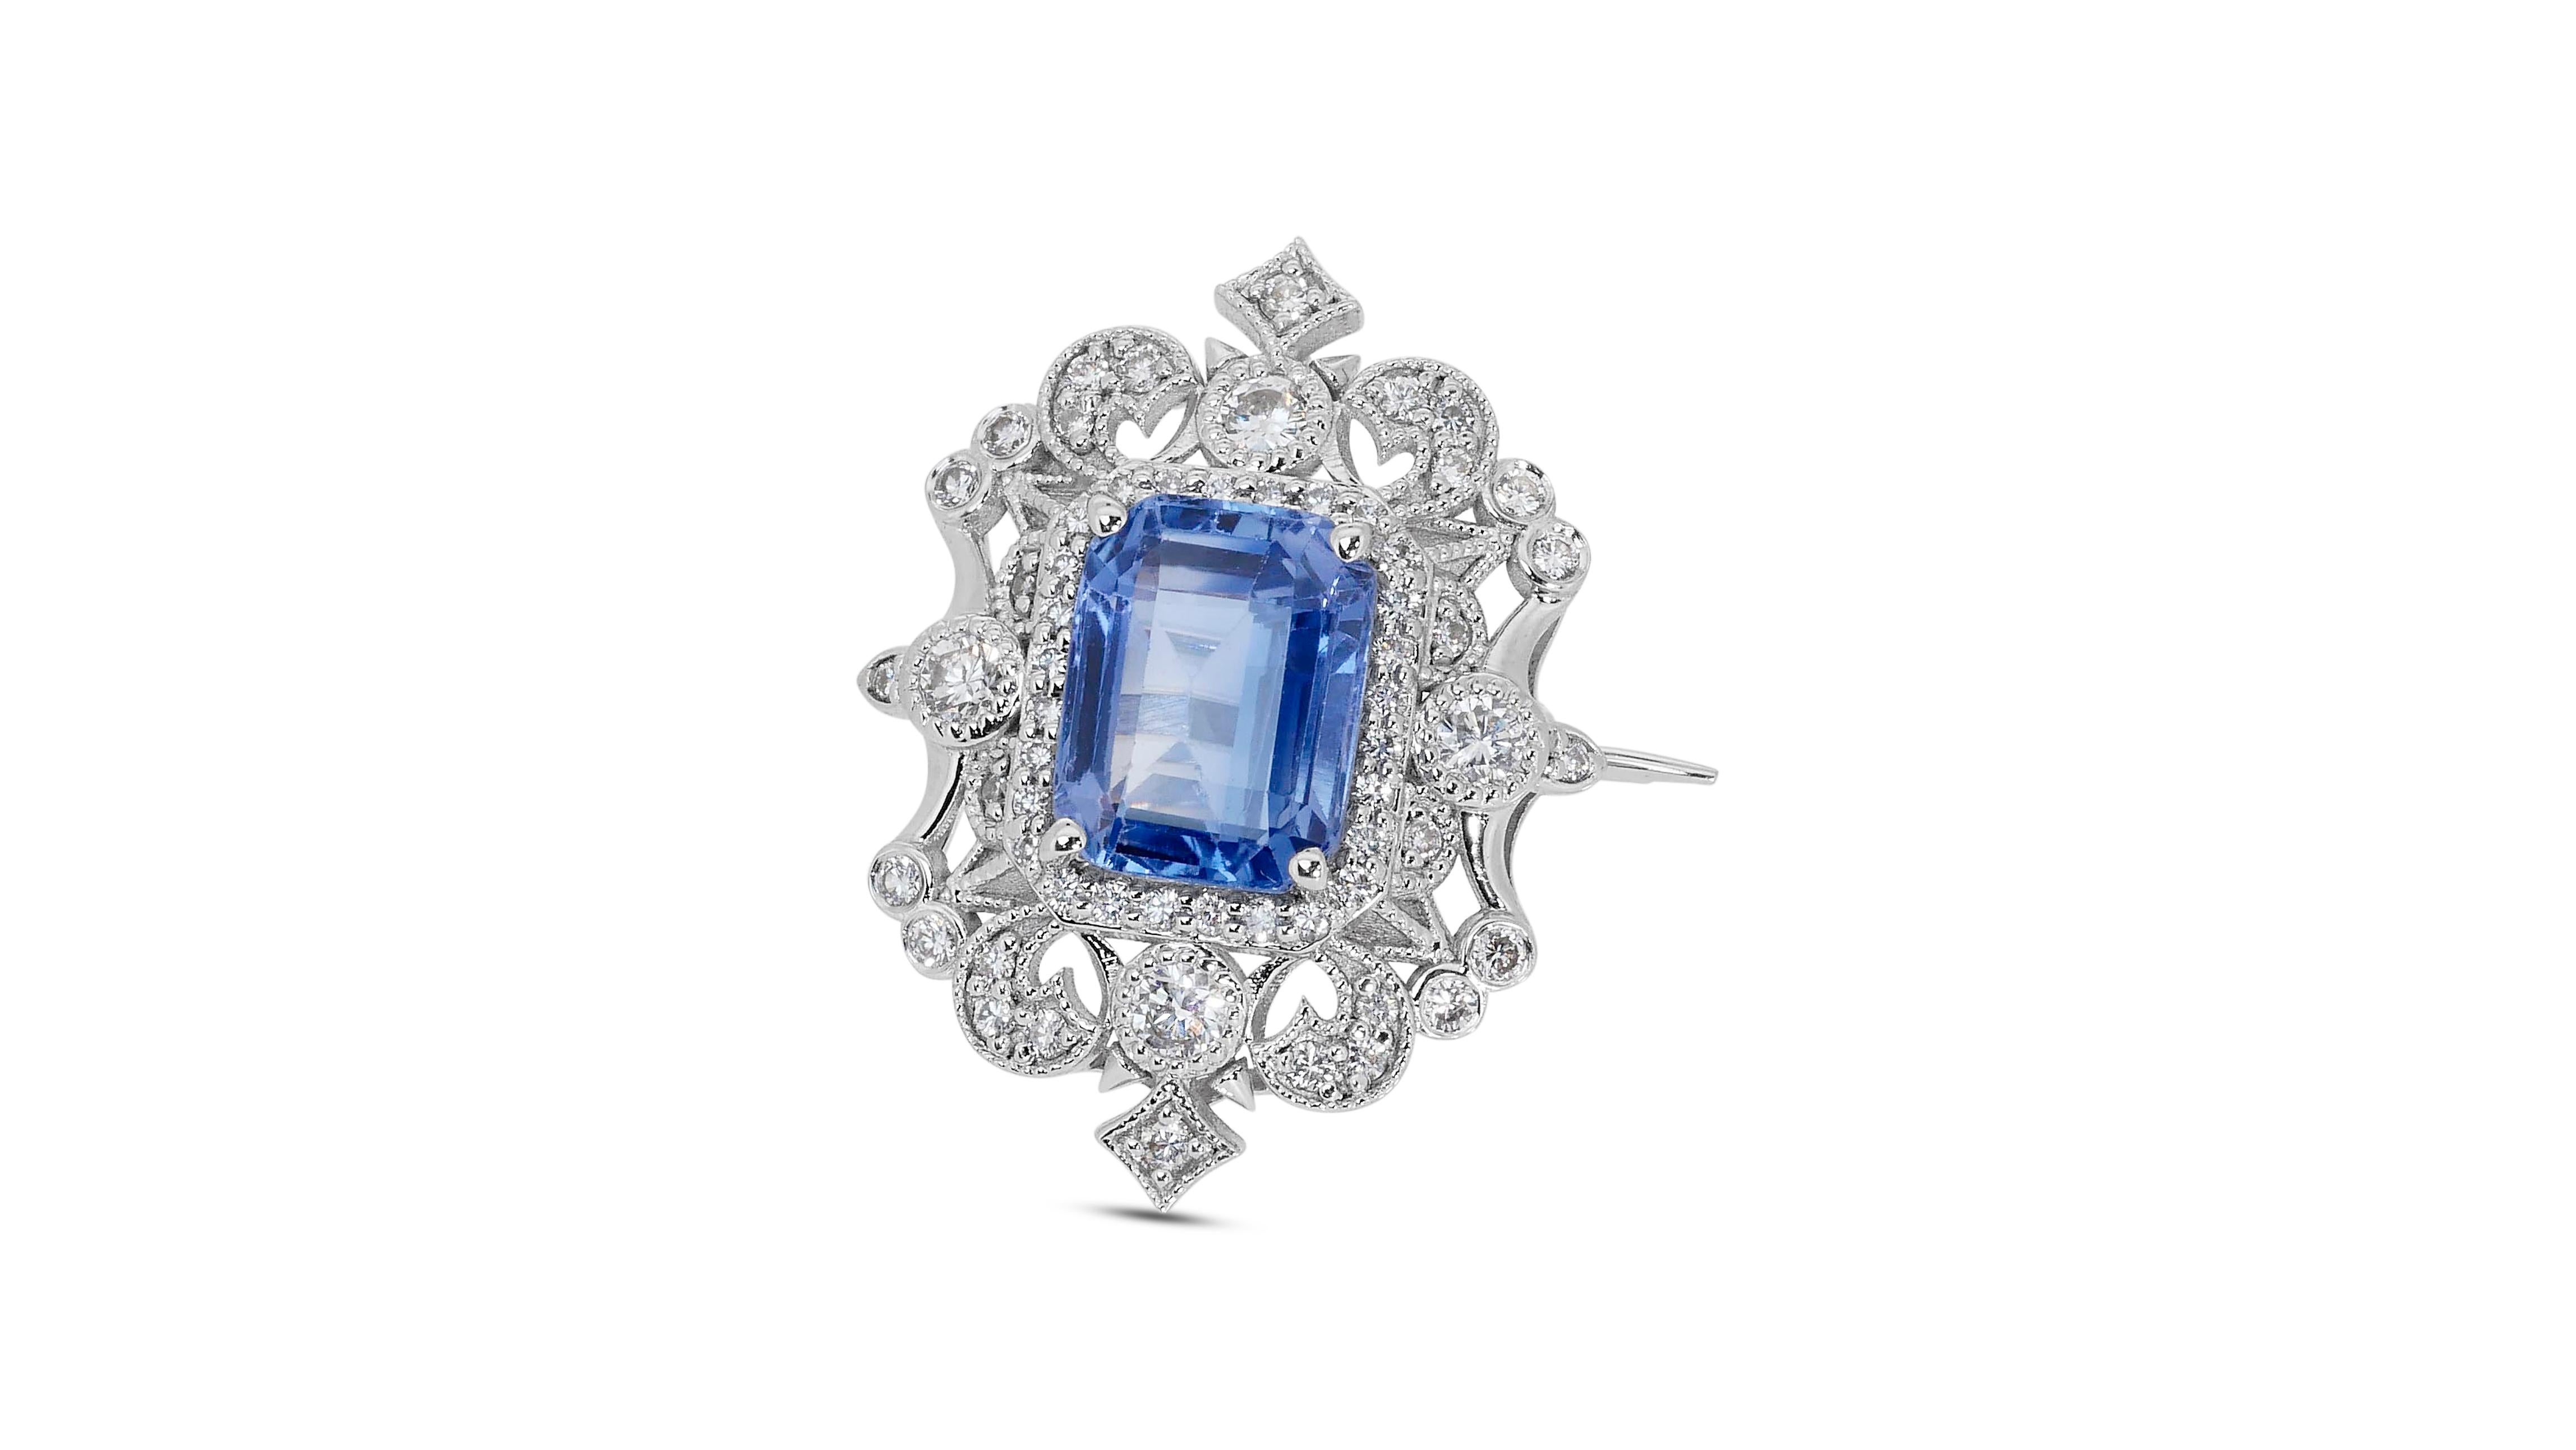 A gorgeous brooch with a dazzling 4.99 carat octagonal natural sapphire. It has 0.80 carats of side diamonds which add more to its elegance. The jewelry is made of 18k White Gold with a high-quality polish. It comes with a GIA certificate and a nice